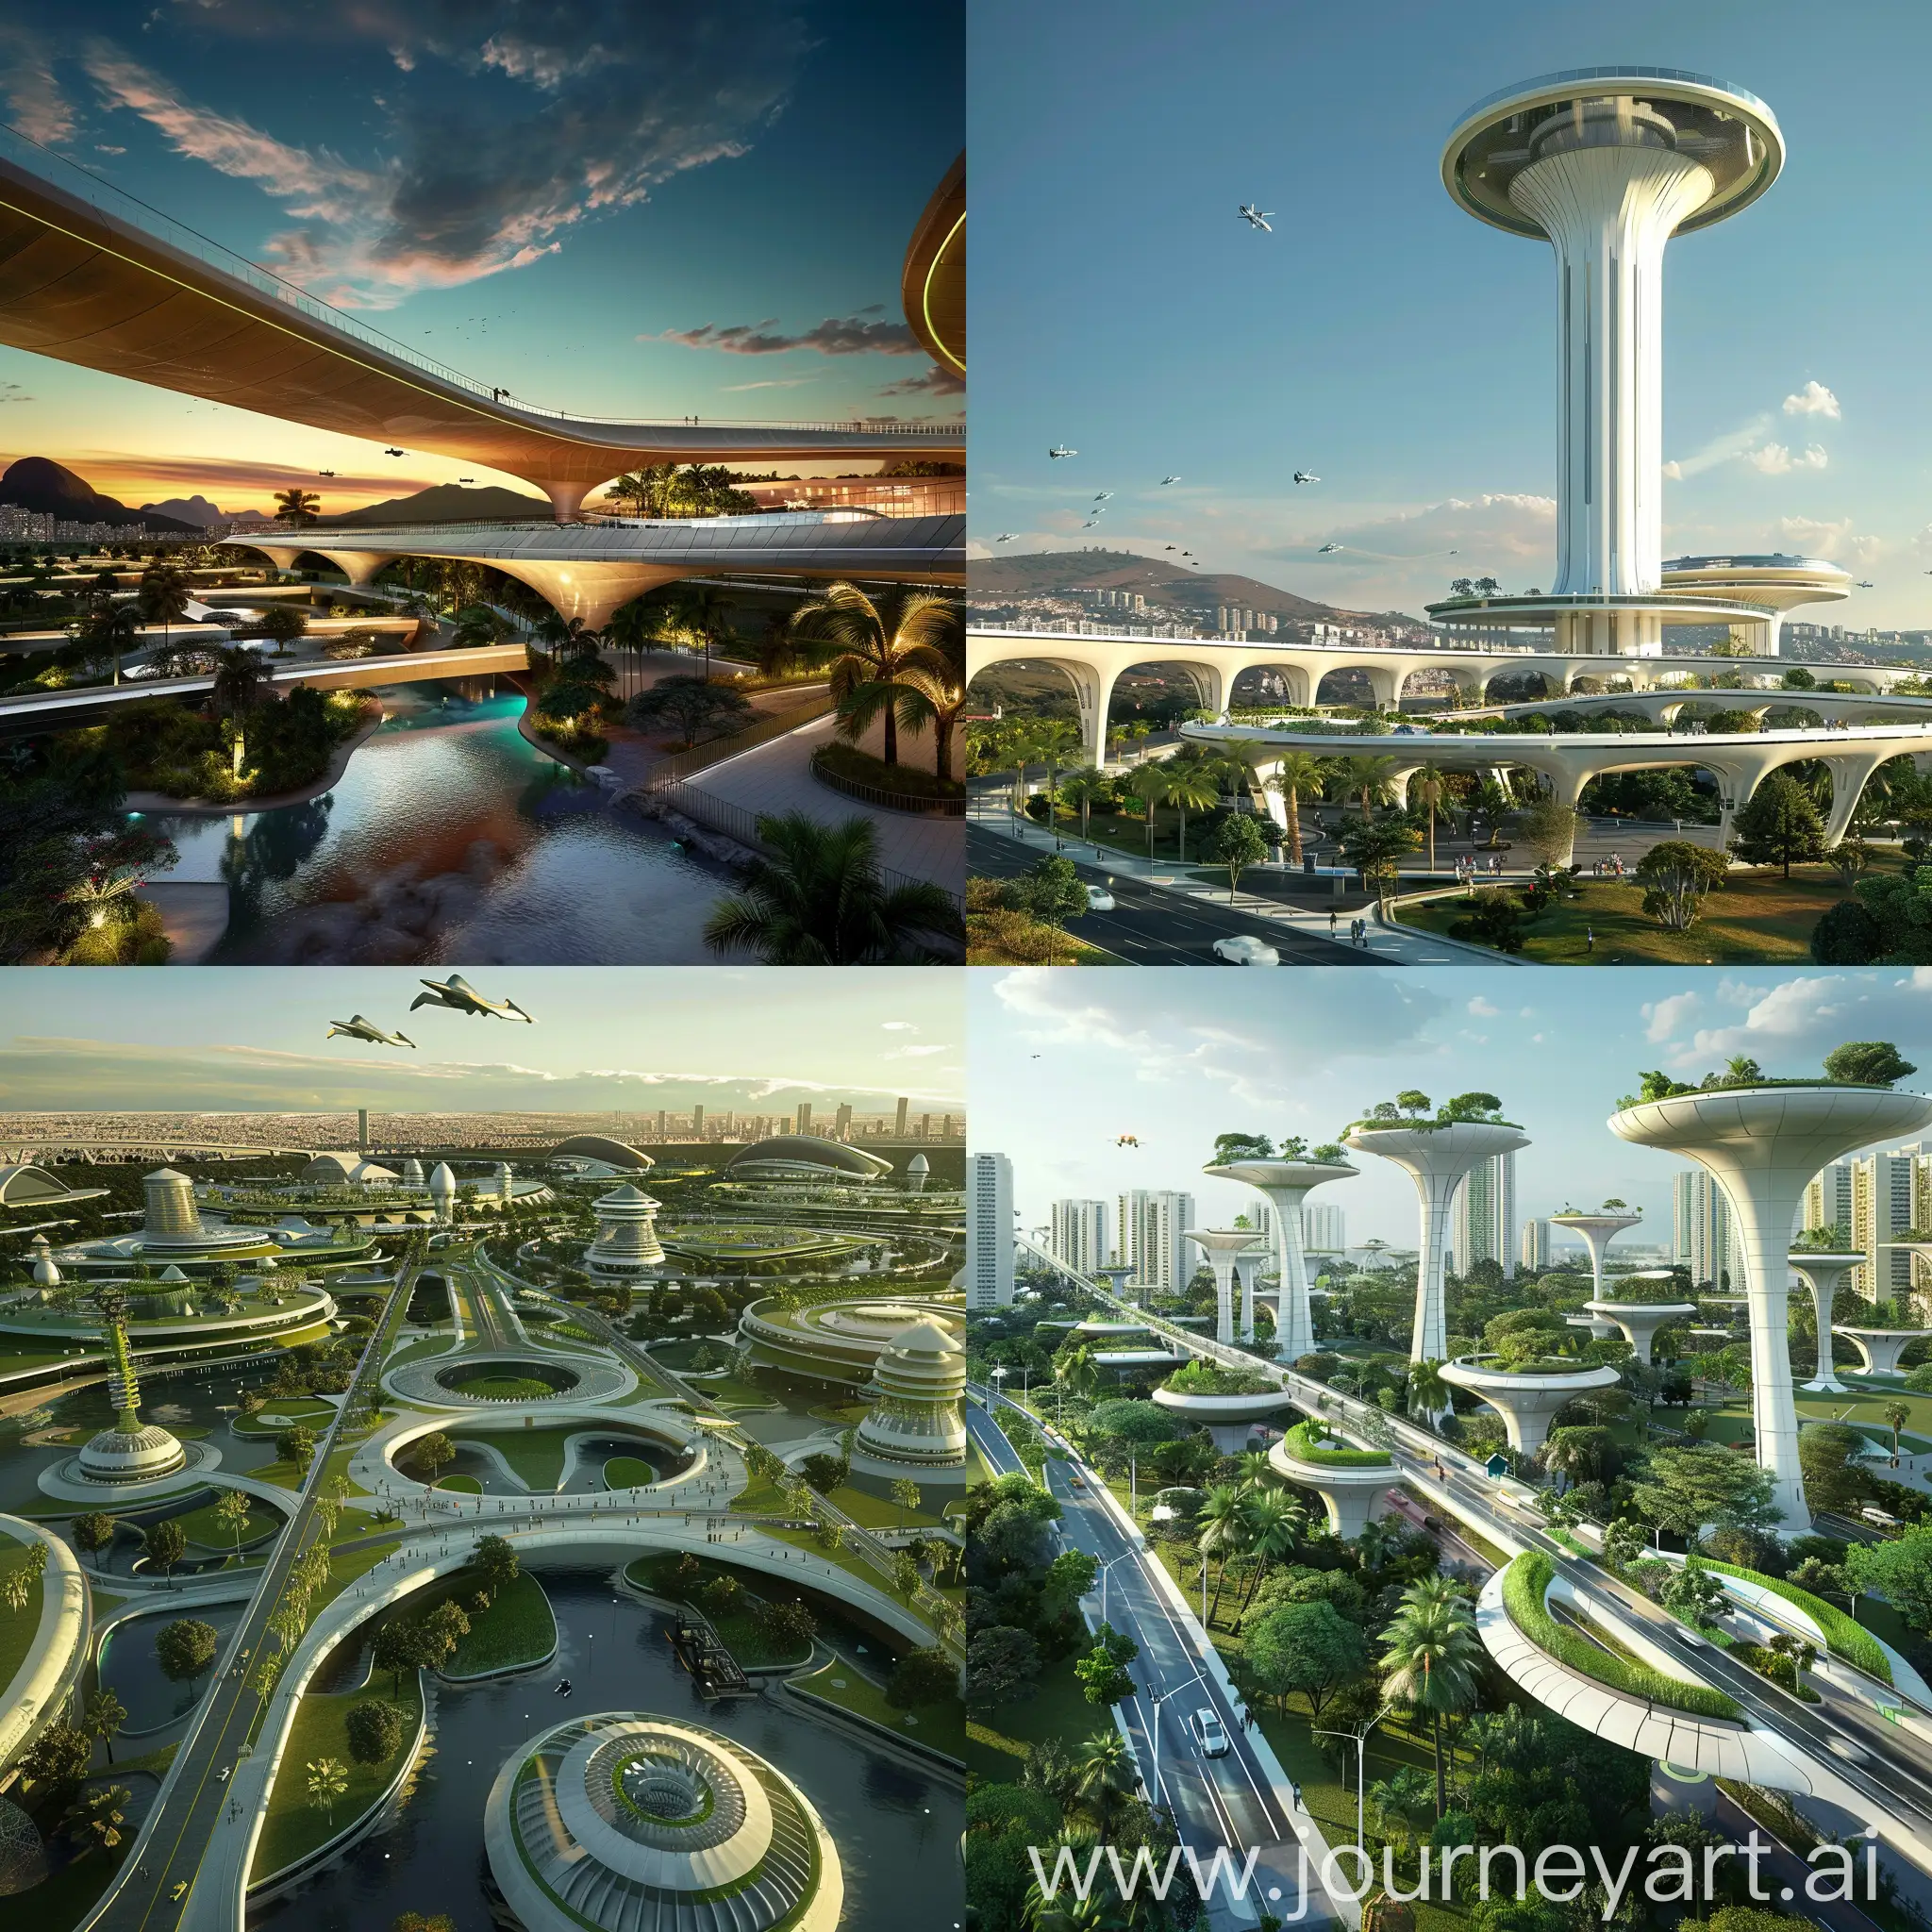 Sci-Fi Brasilia, Advanced Science and Technology, Advanced Achievements of Science and Technology, Smart Grids, Water Reclamation Facilities. Vertical Farms, Waste-to-Energy Plants, Autonomous Public Transport, Green Buildings, Urban Air Mobility Platforms, Responsive Roadways, Smart Housing, Public Data Hubs, Dynamic Facades, Drone Delivery Ports, Solar Canopies, Atmospheric Water Generators, Elevated Greenways, Kinetic Energy Harvesters, Interactive Public Art, Air Purification Towers, Light Pollution Reducers, Climate Resilience Barriers, In Unreal Engine 5 Style --stylize 1000